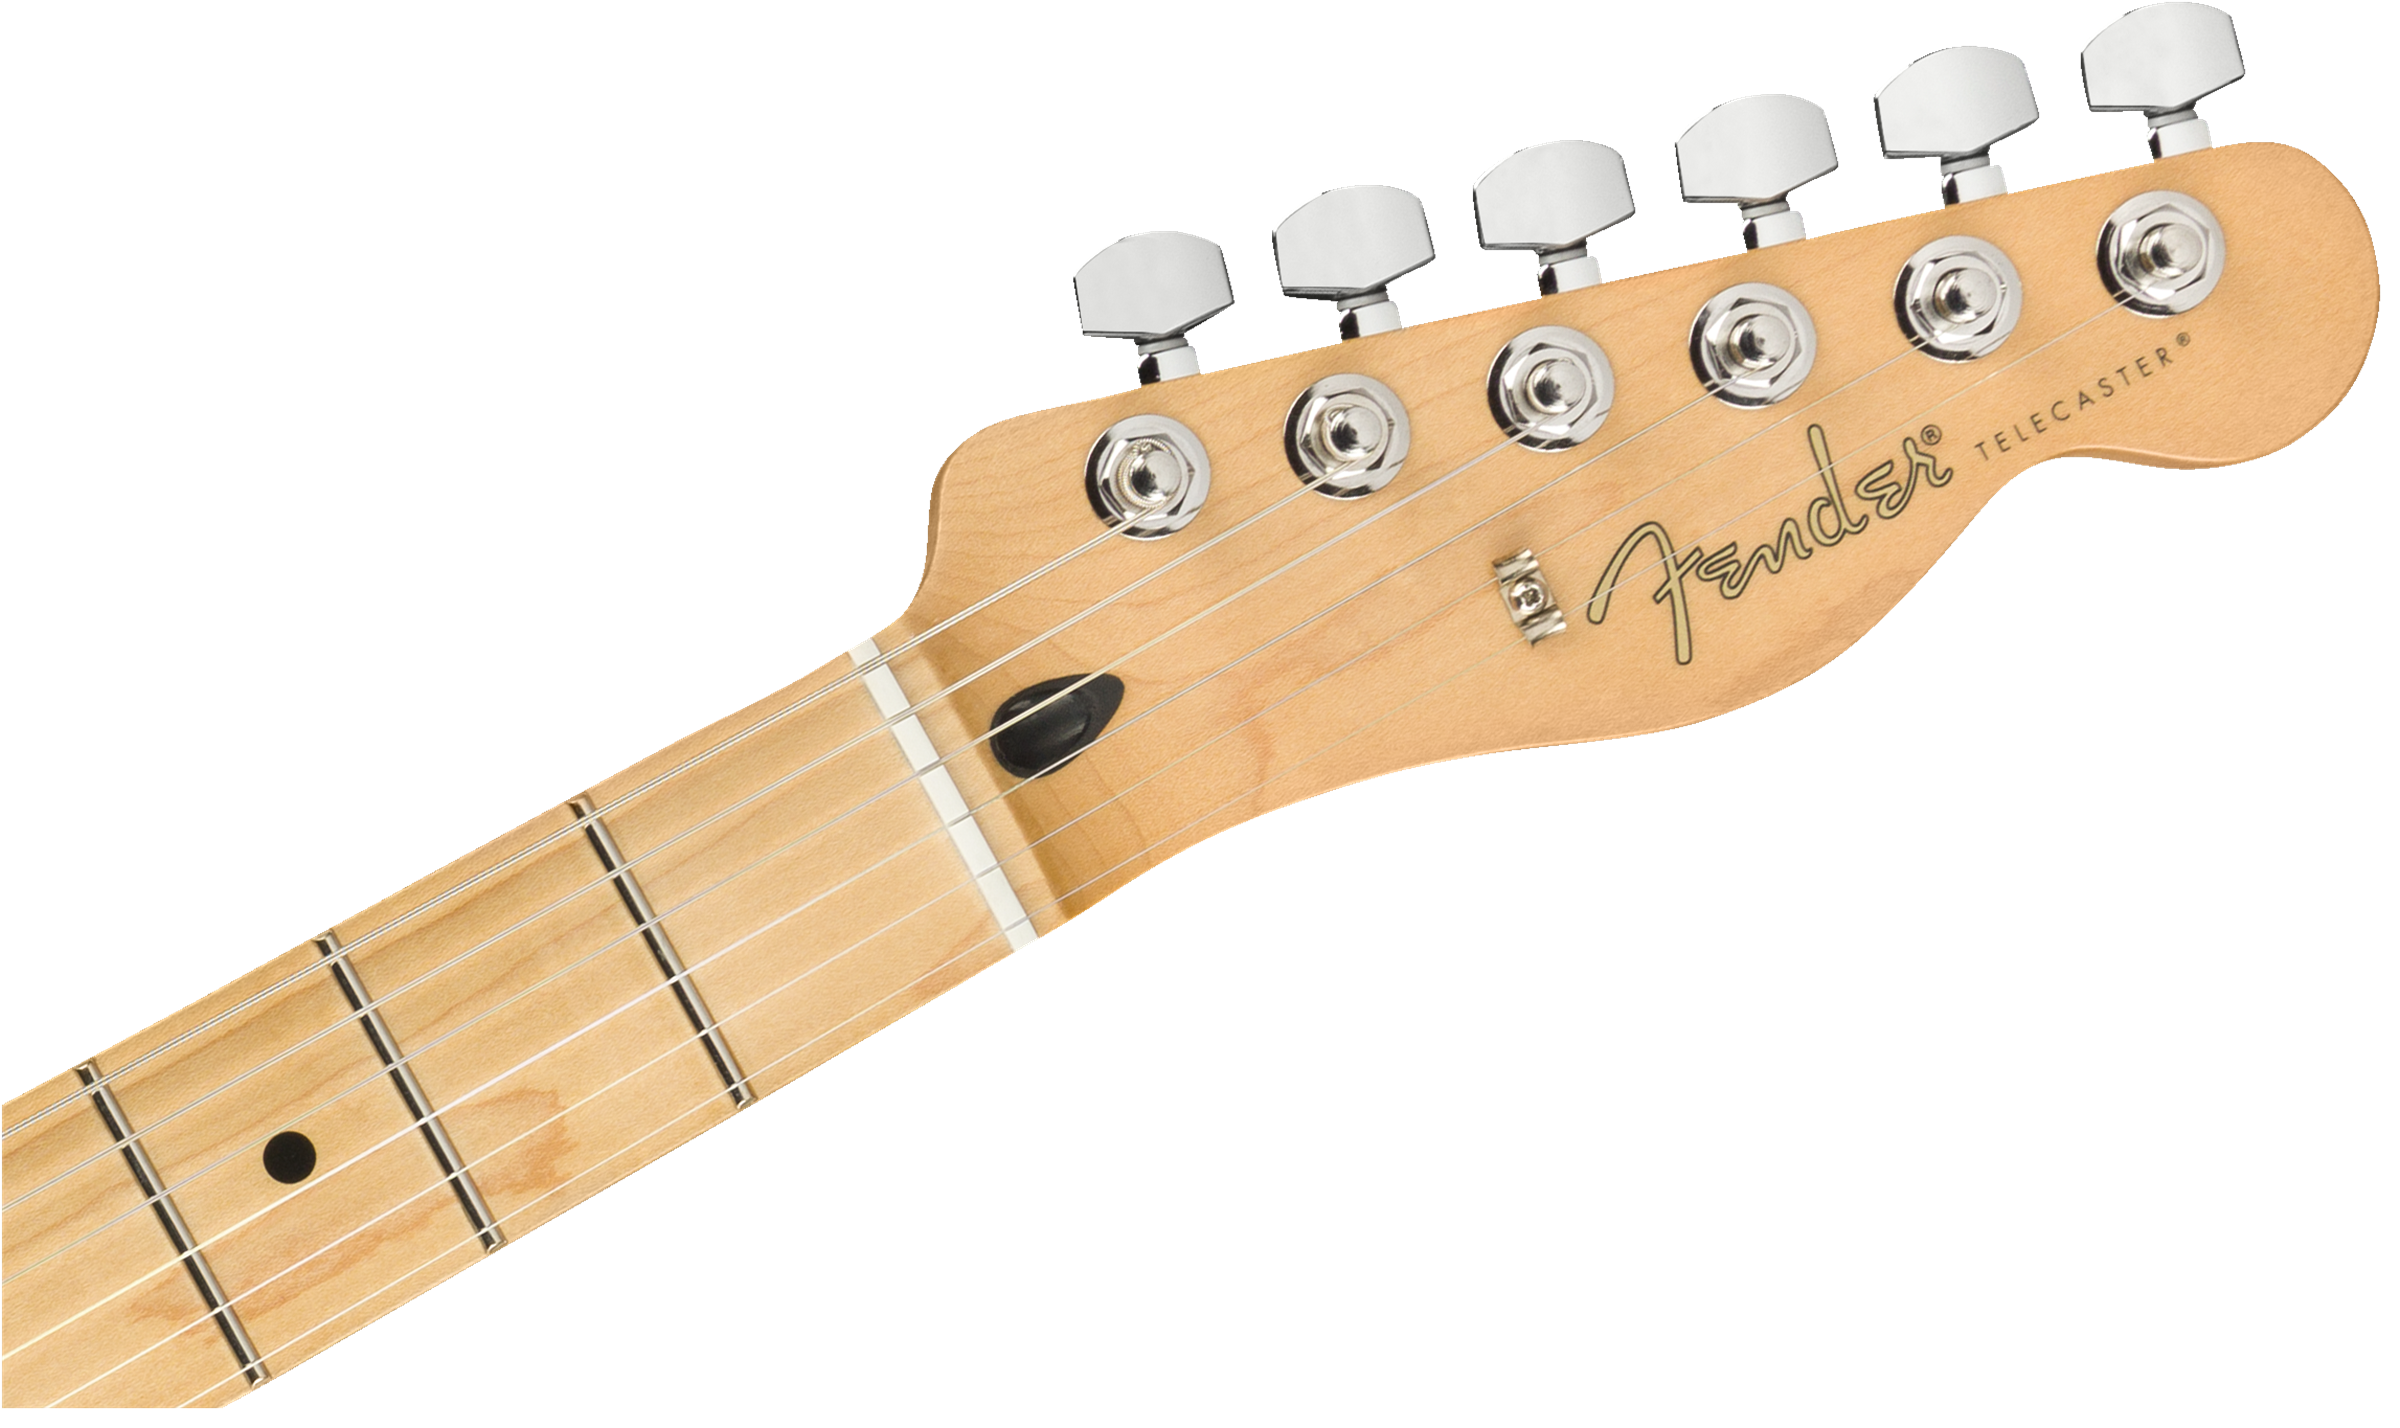 Fender Player Series Telecaster in Tidepool